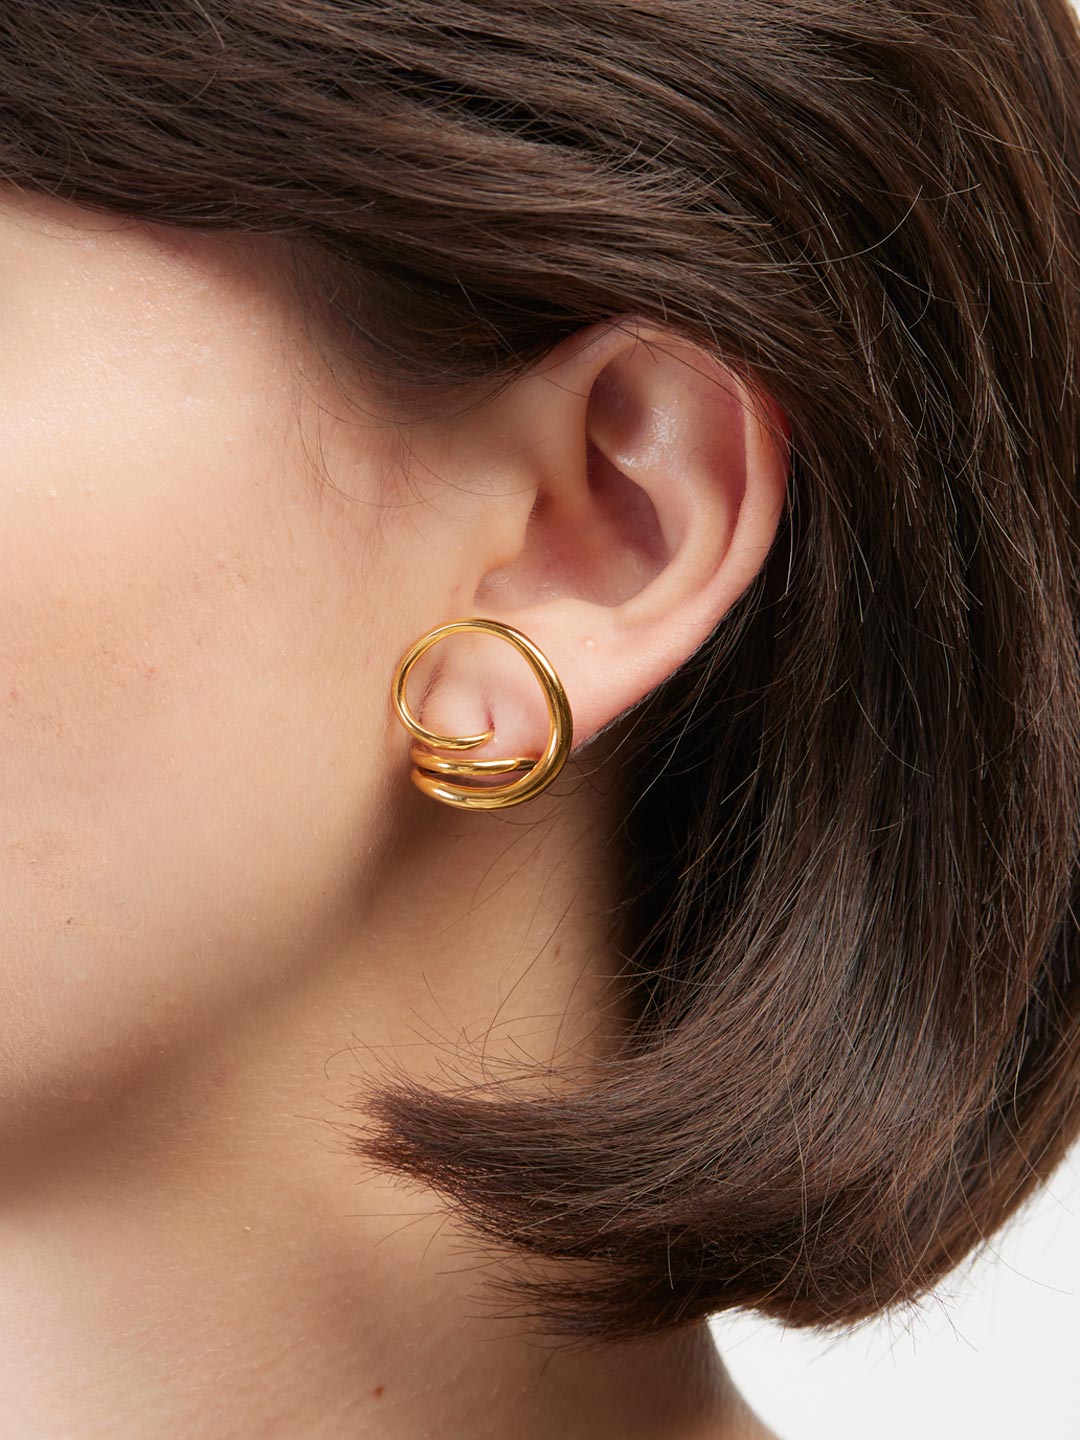 Round Trip PAIR Pierced Earrings - Yellow Gold